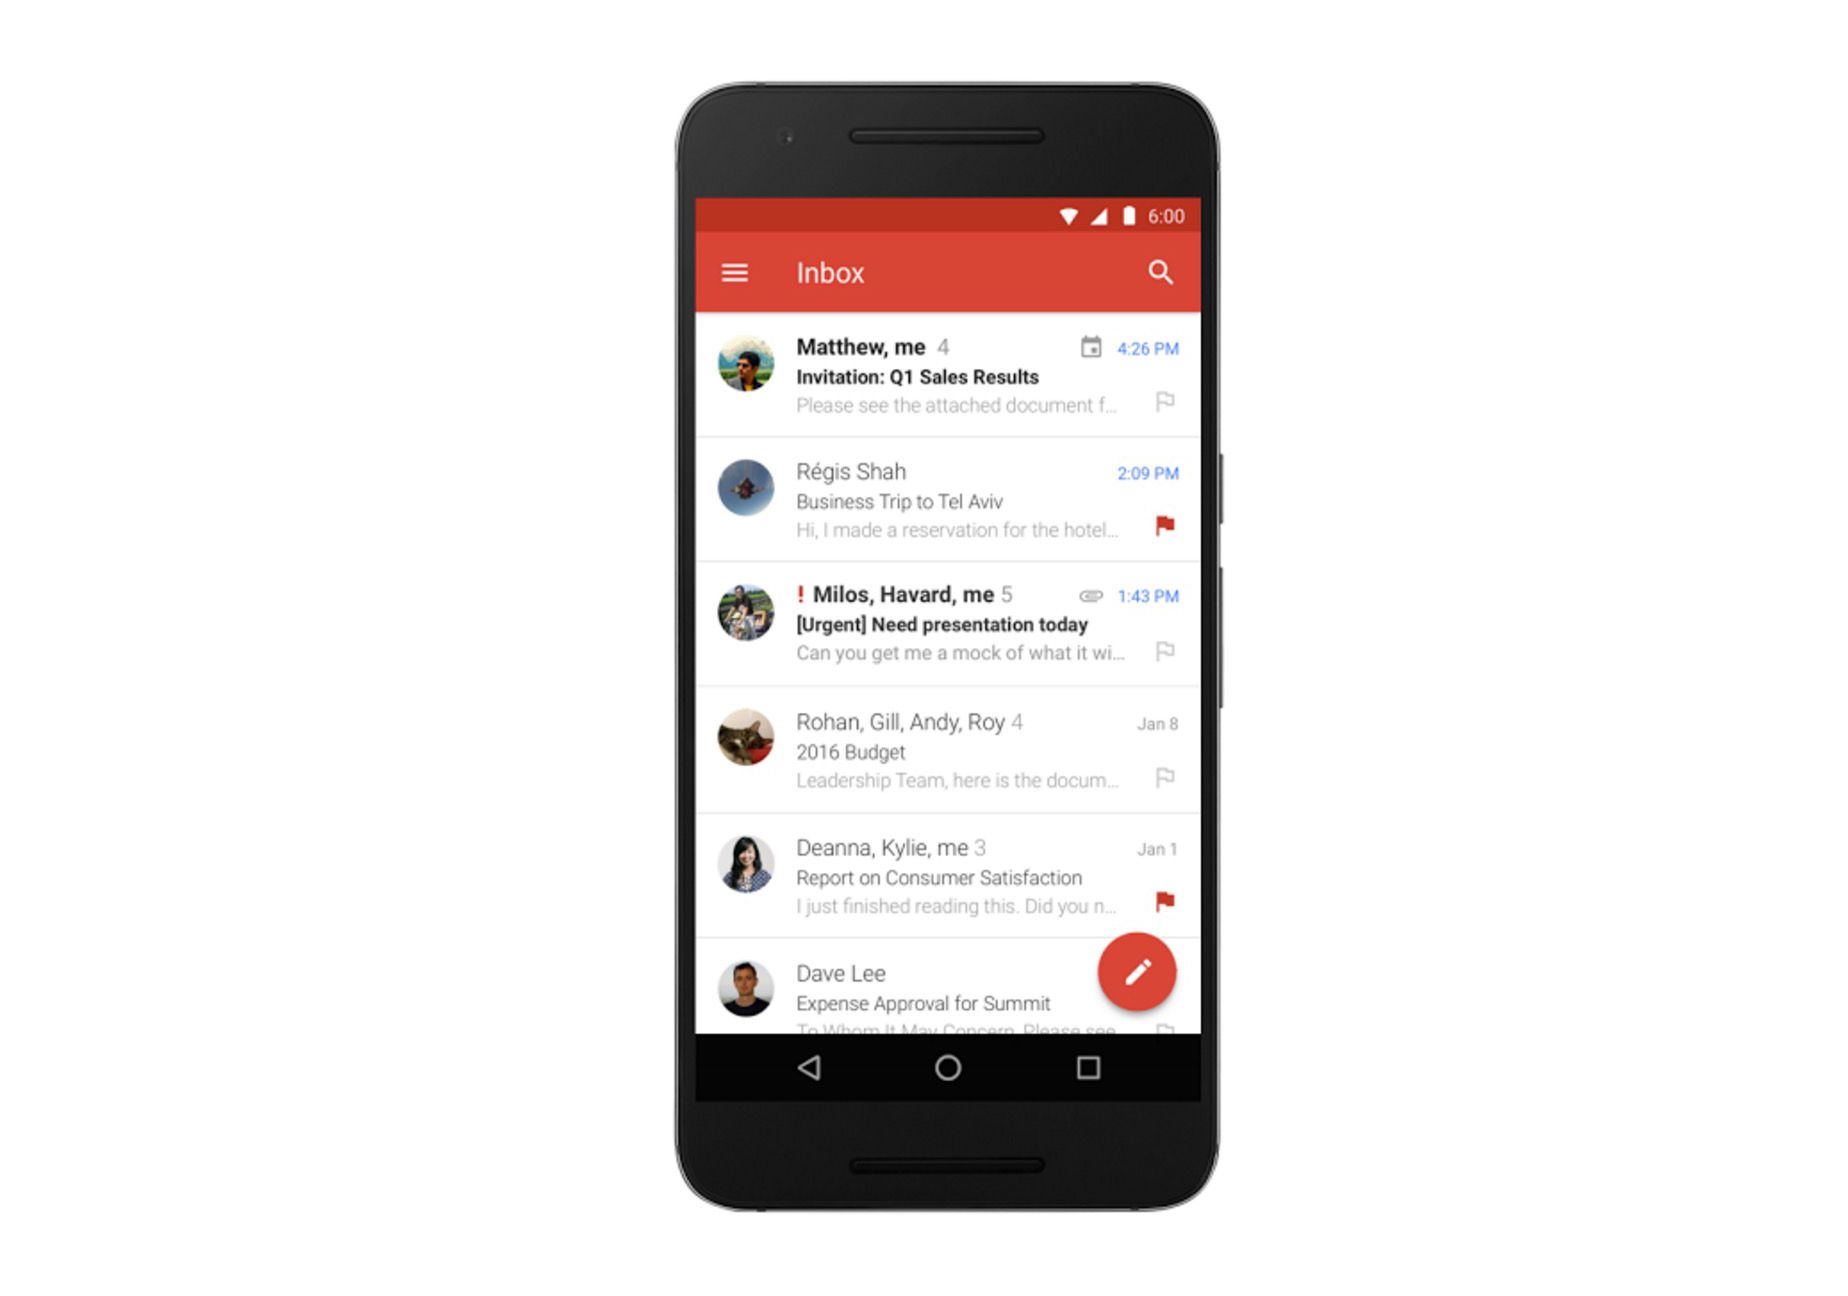 gmail for android adds microsoft exchange support for all devices image 1